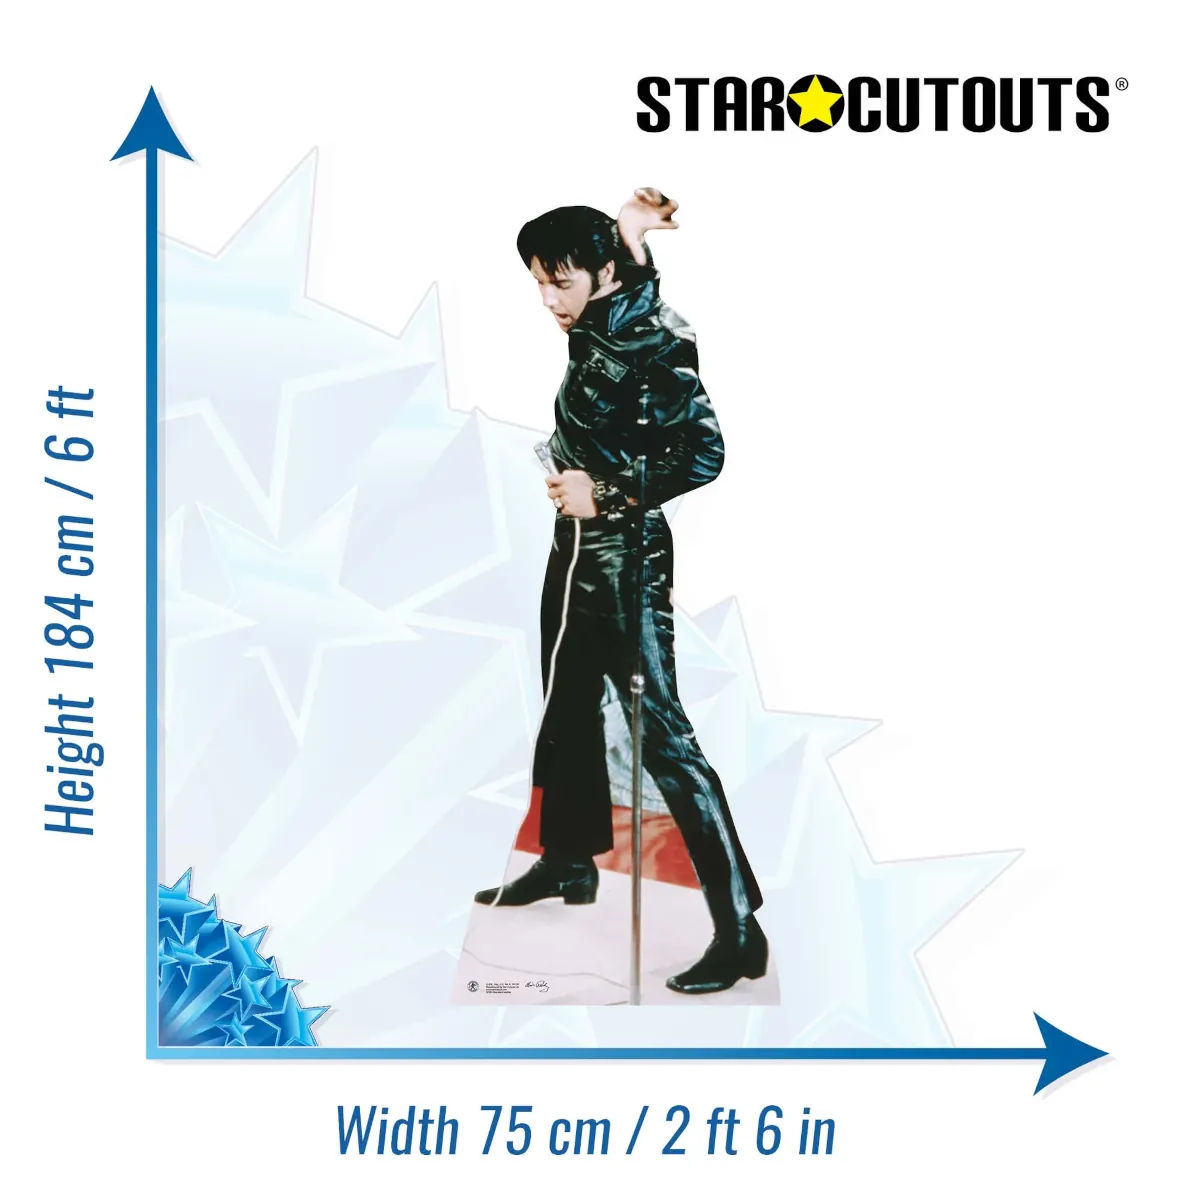 SC594 Elvis Presley 'Black Leather' (American Singer) Official Lifesize Cardboard Cutout Standee Size